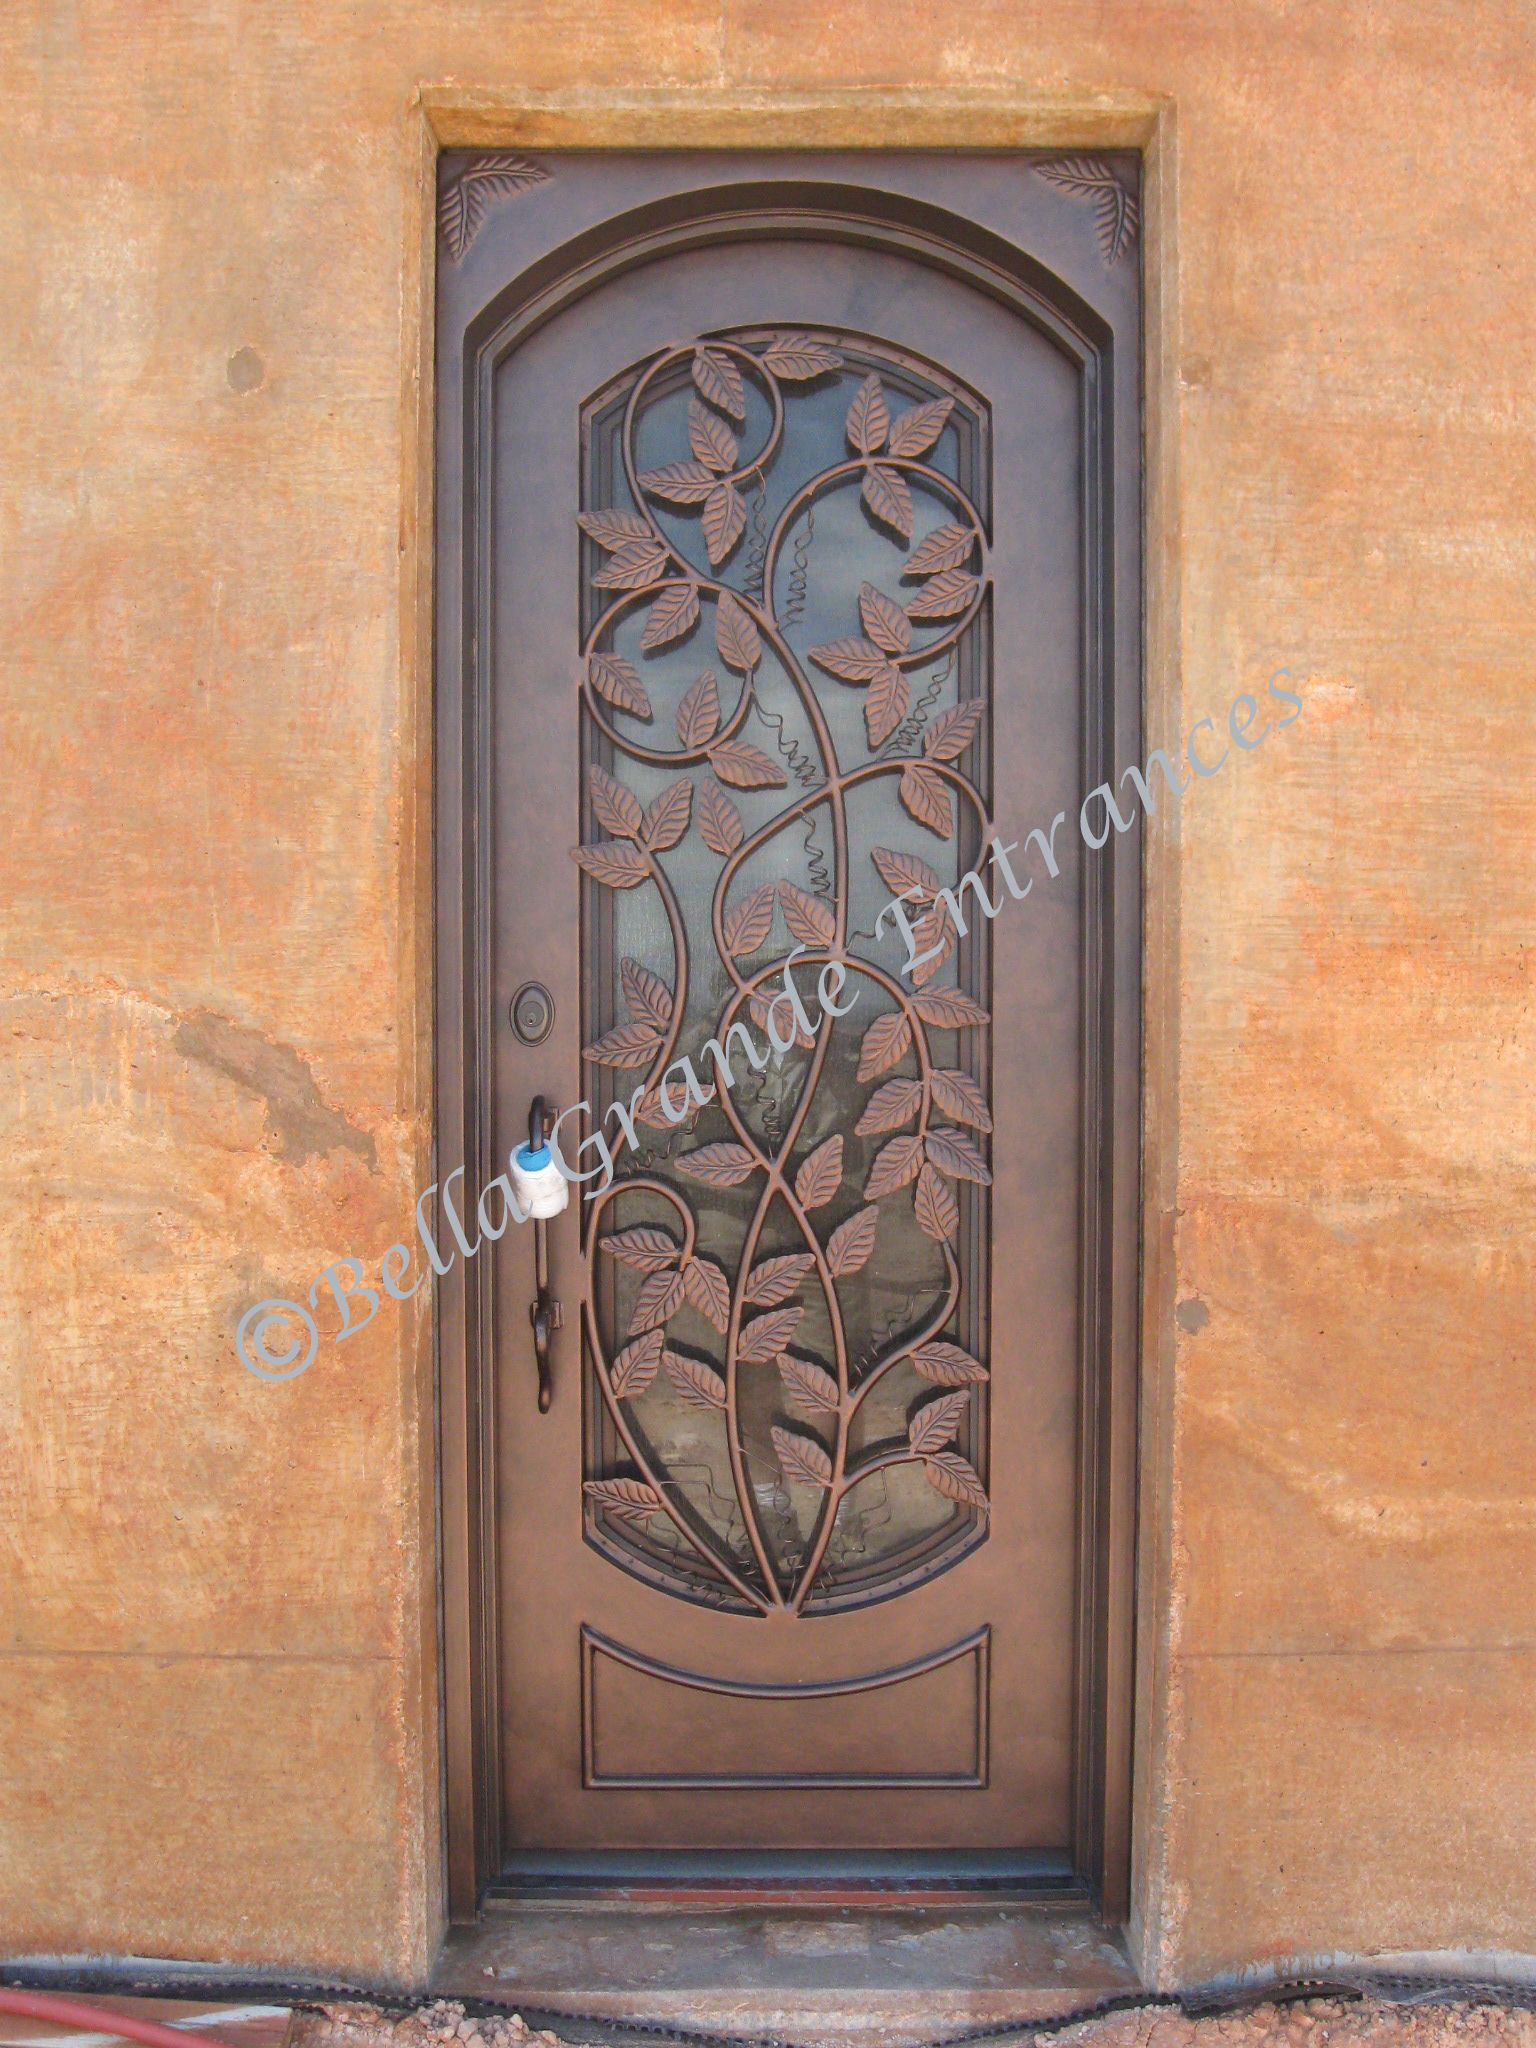 A close-up of a leafy design decorating an iron door at a house in Las Vegas.